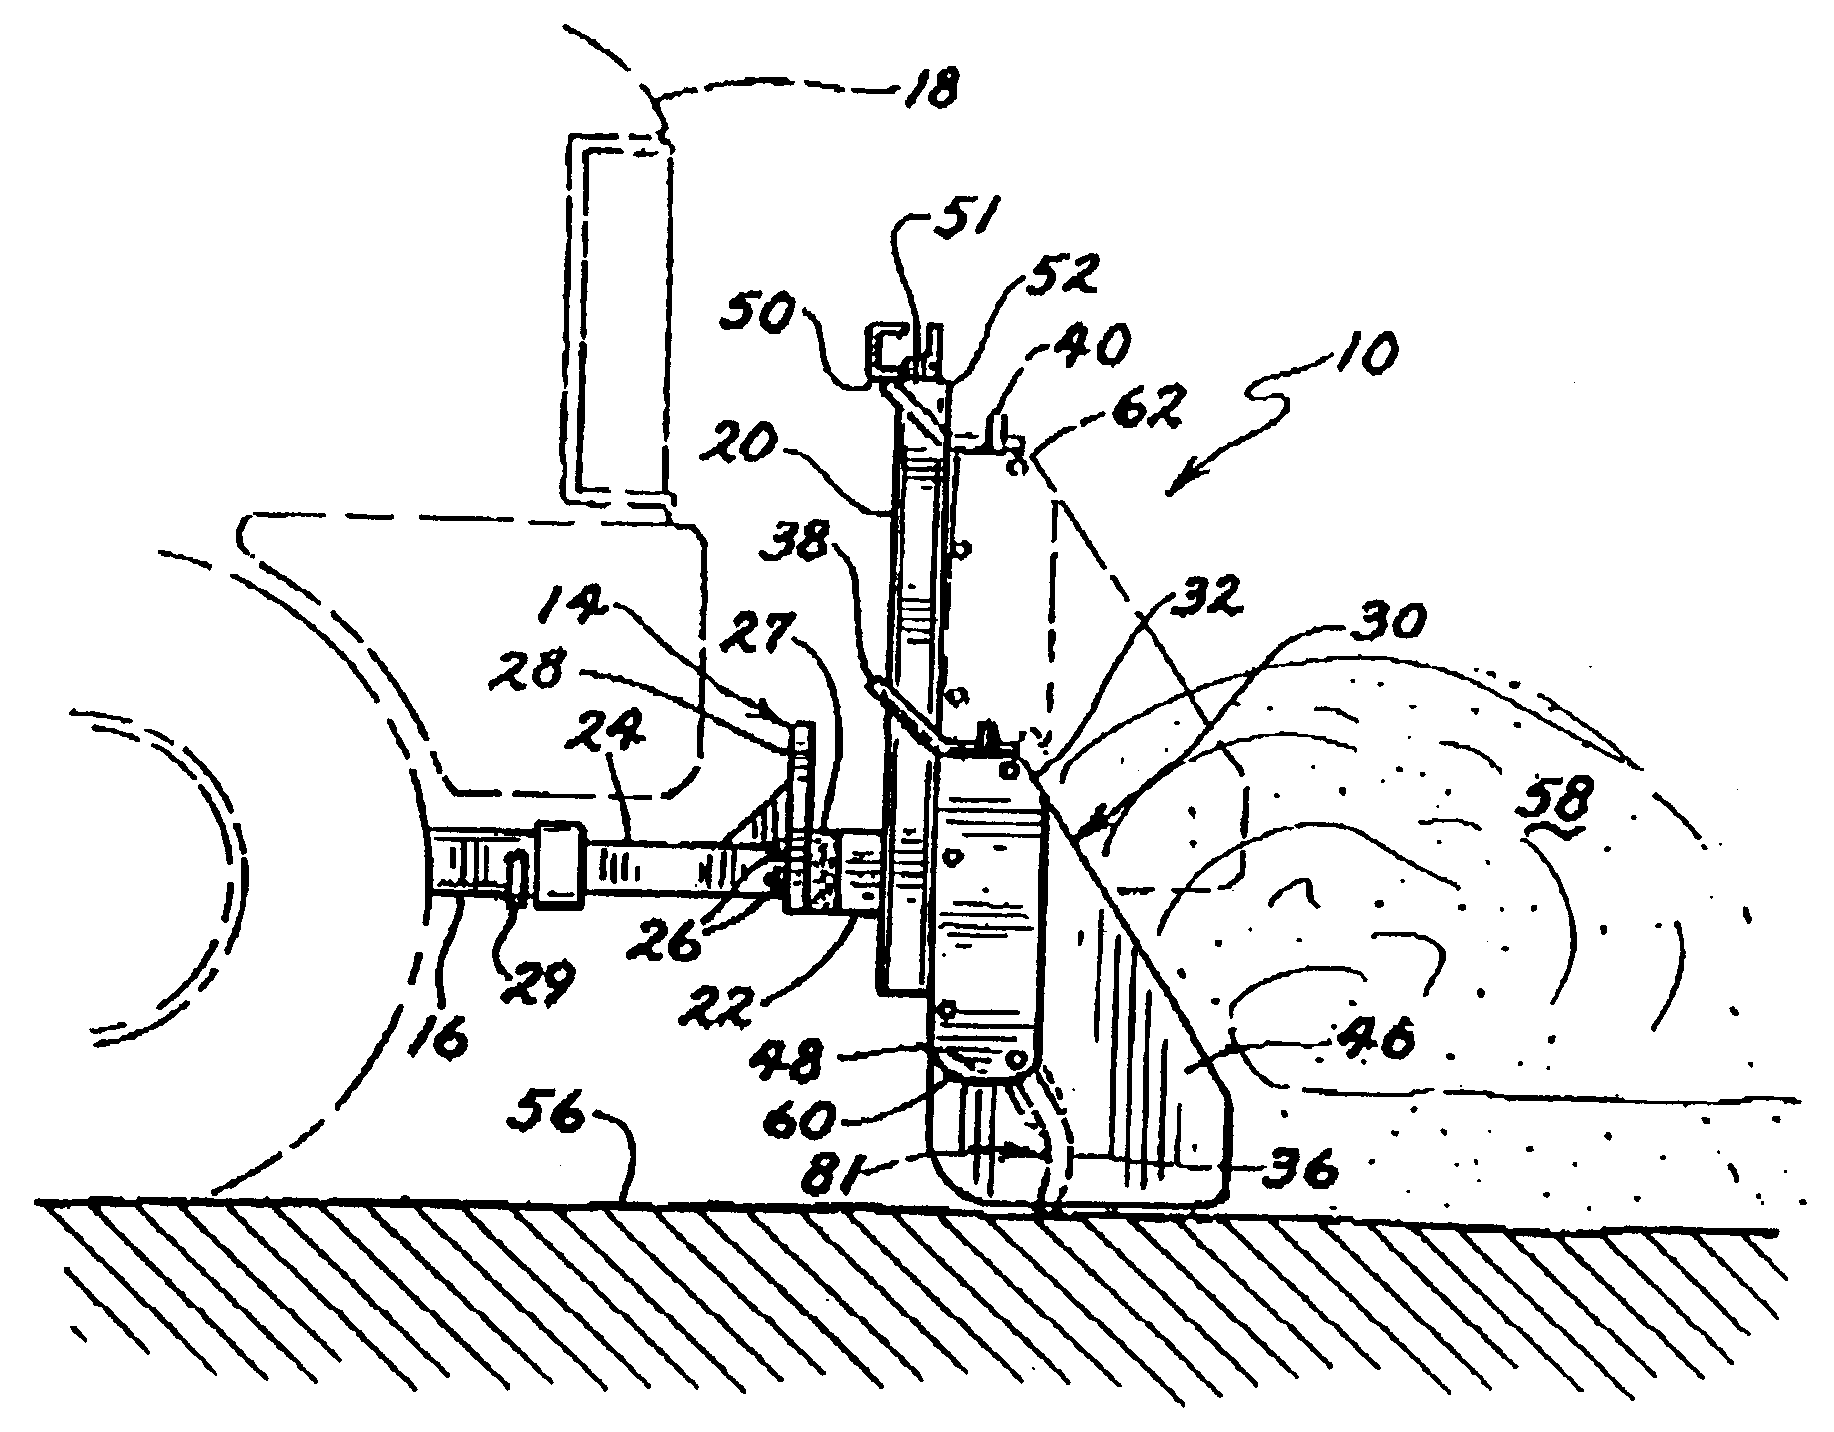 Plow blade having integrally formed attachment channel